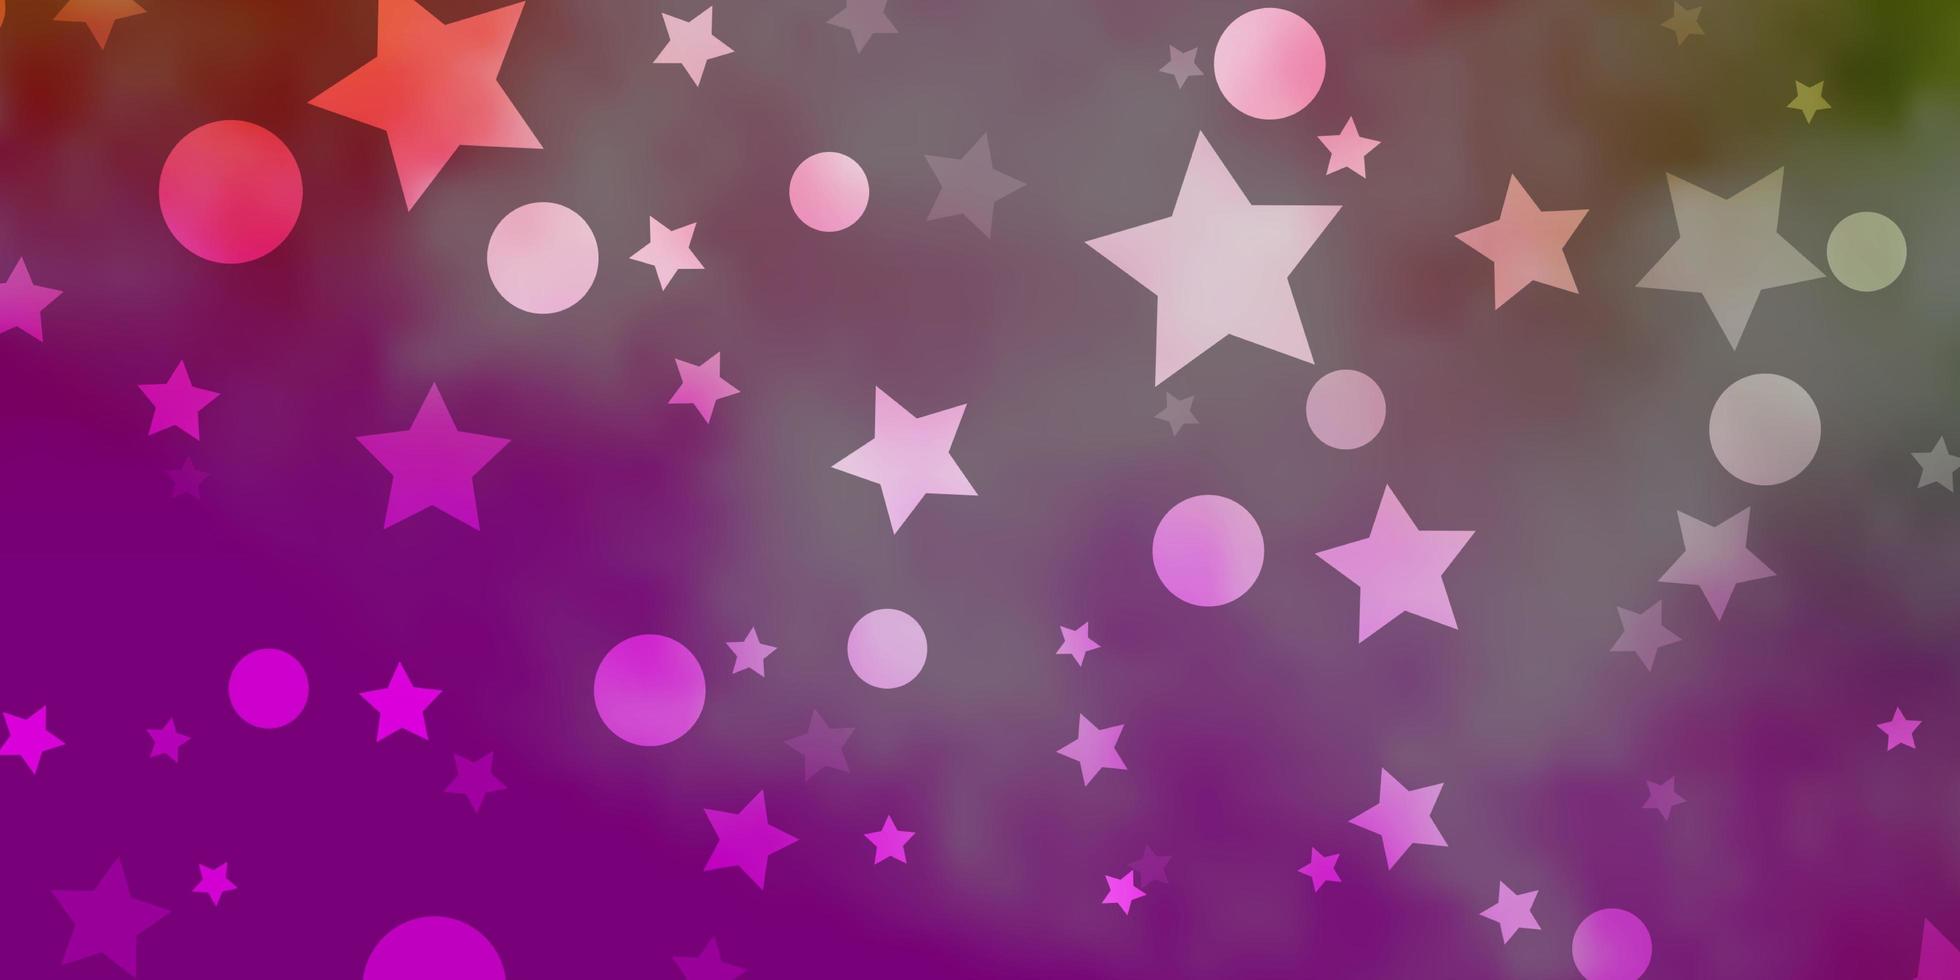 Light Pink, Green vector background with circles, stars.